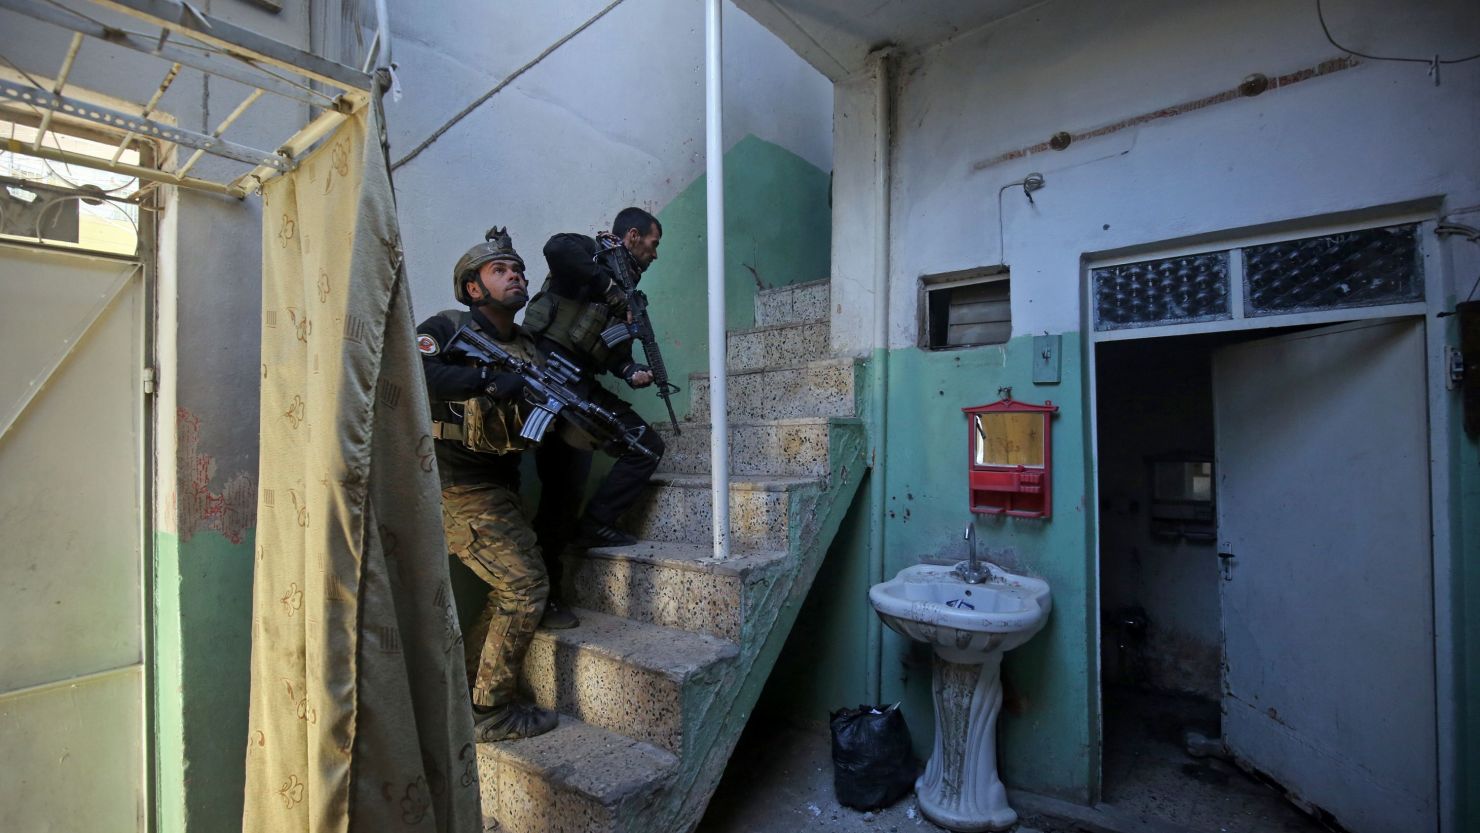 Members of the Iraqi Special Forces clear a building in eastern Mosul on January 2, 2017.